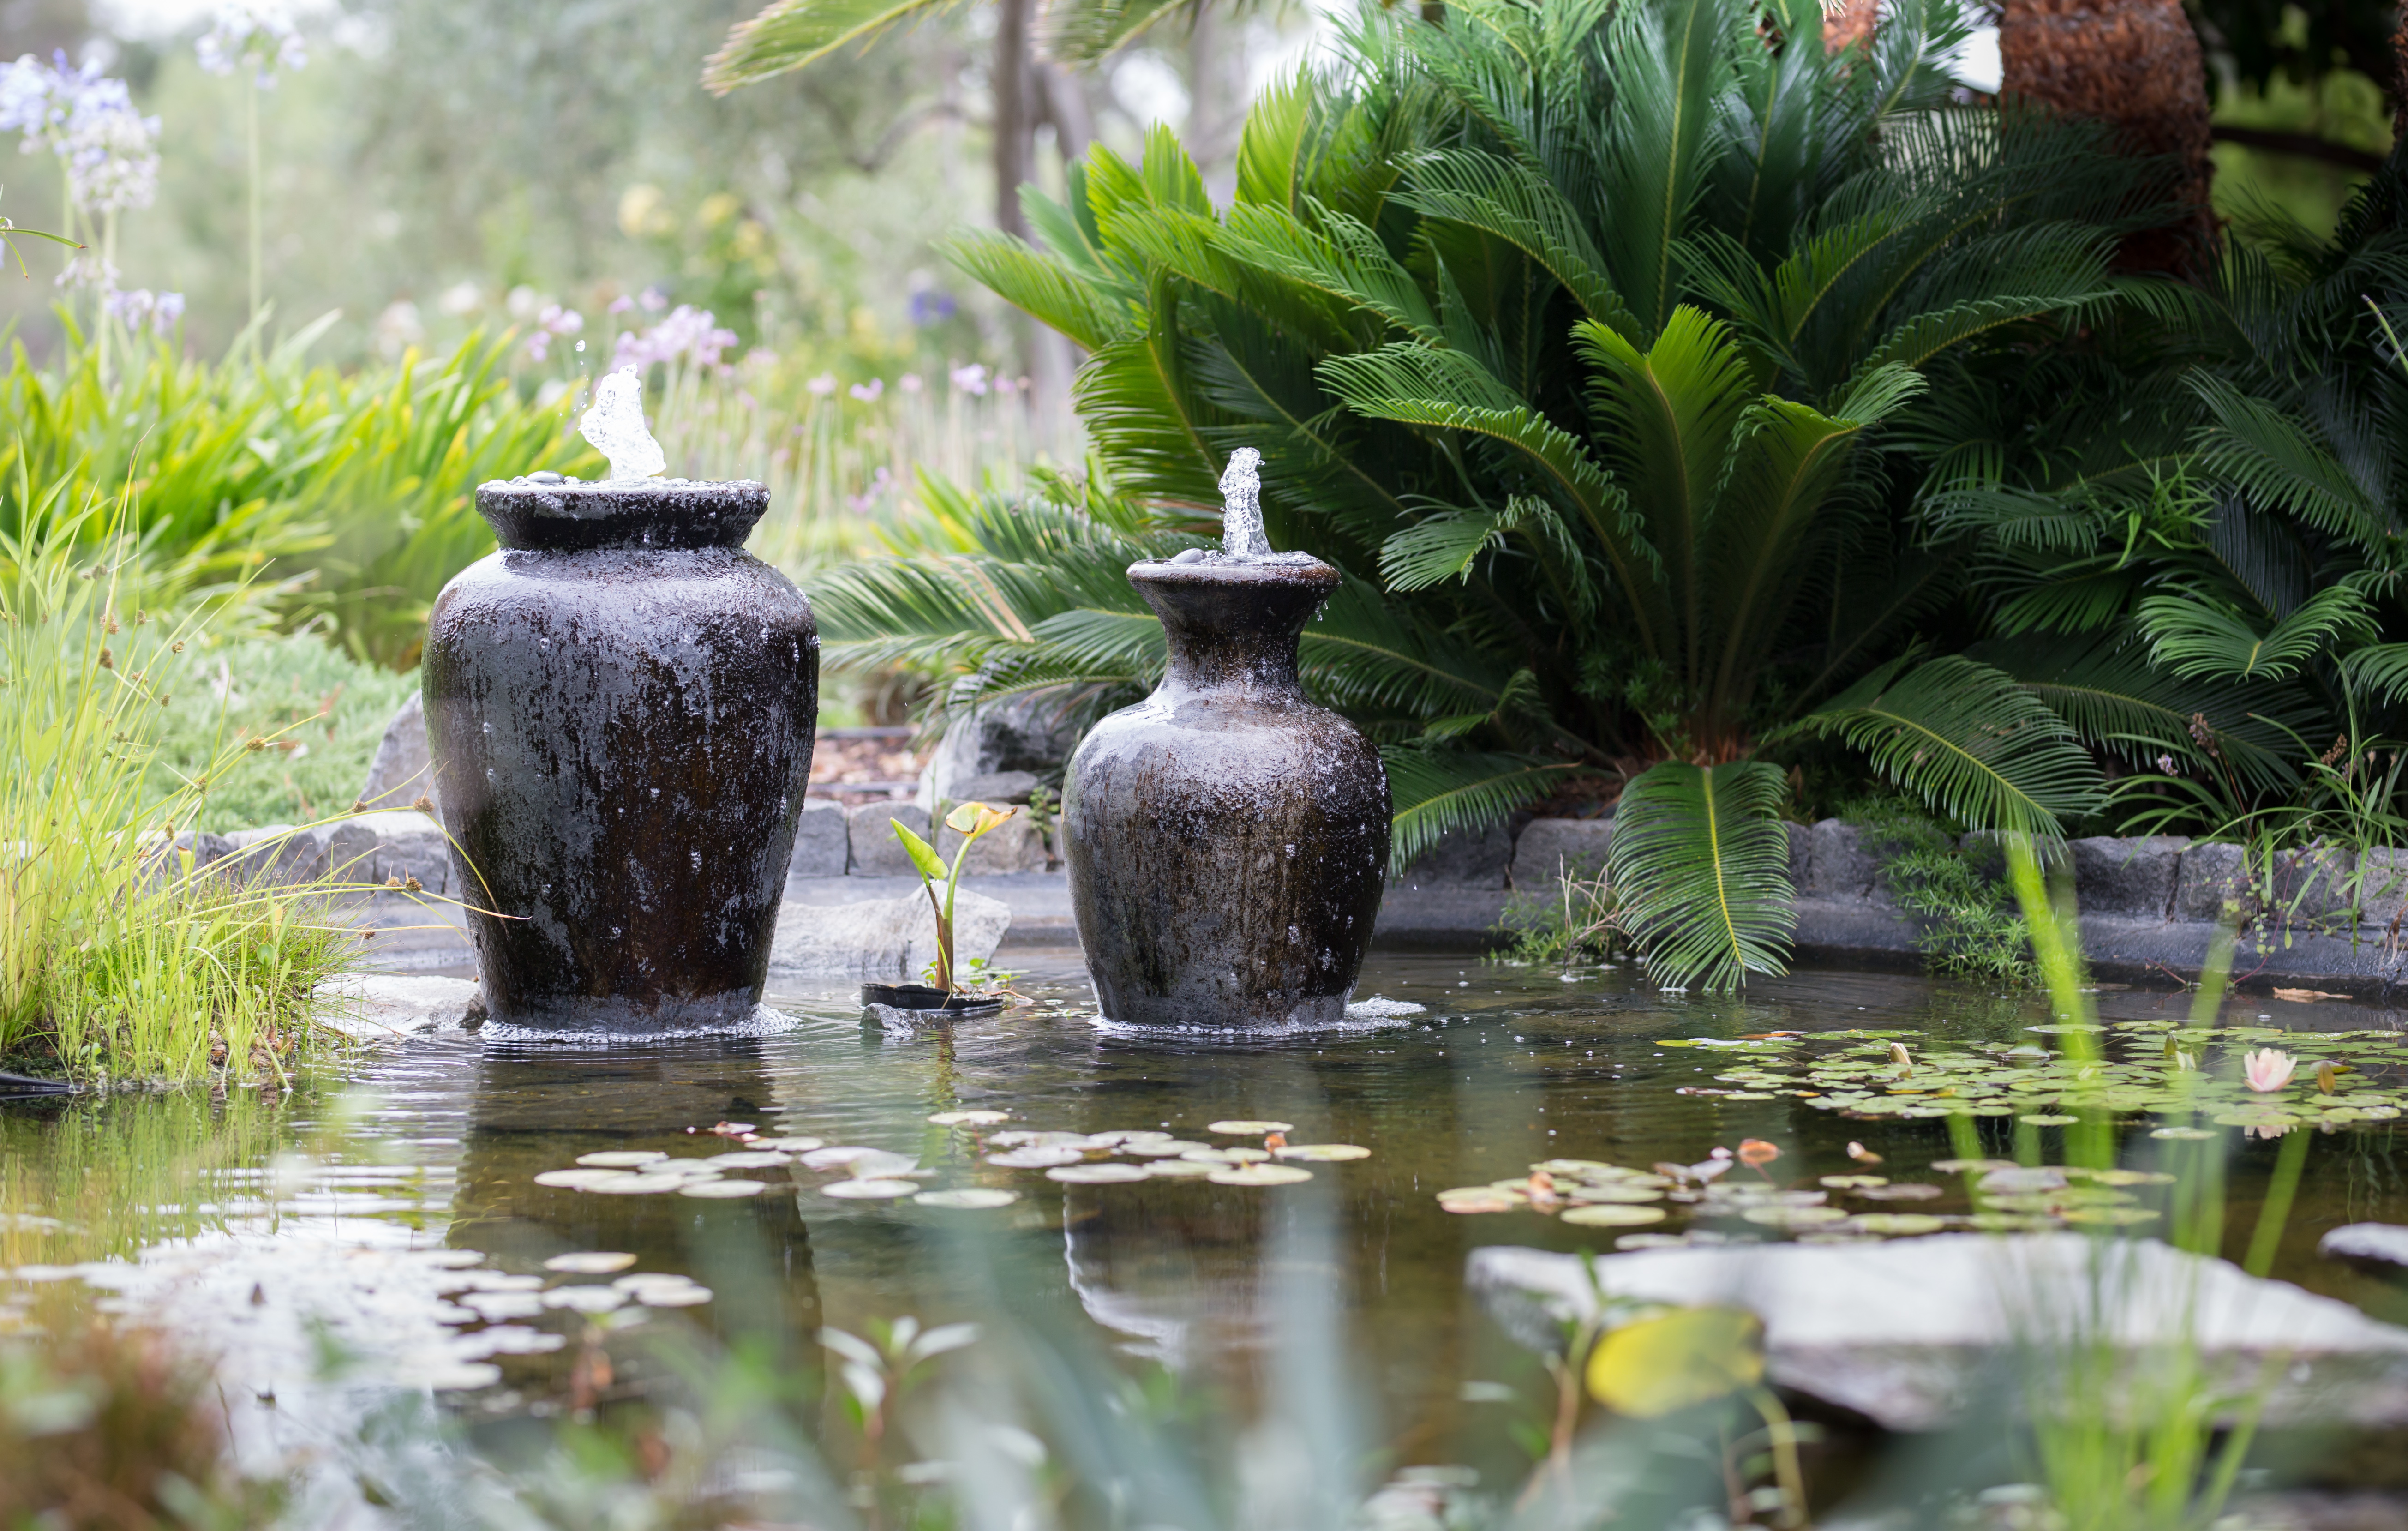 Plants, landscaping, and water features help define the space you have to design your outdoor lounge around.